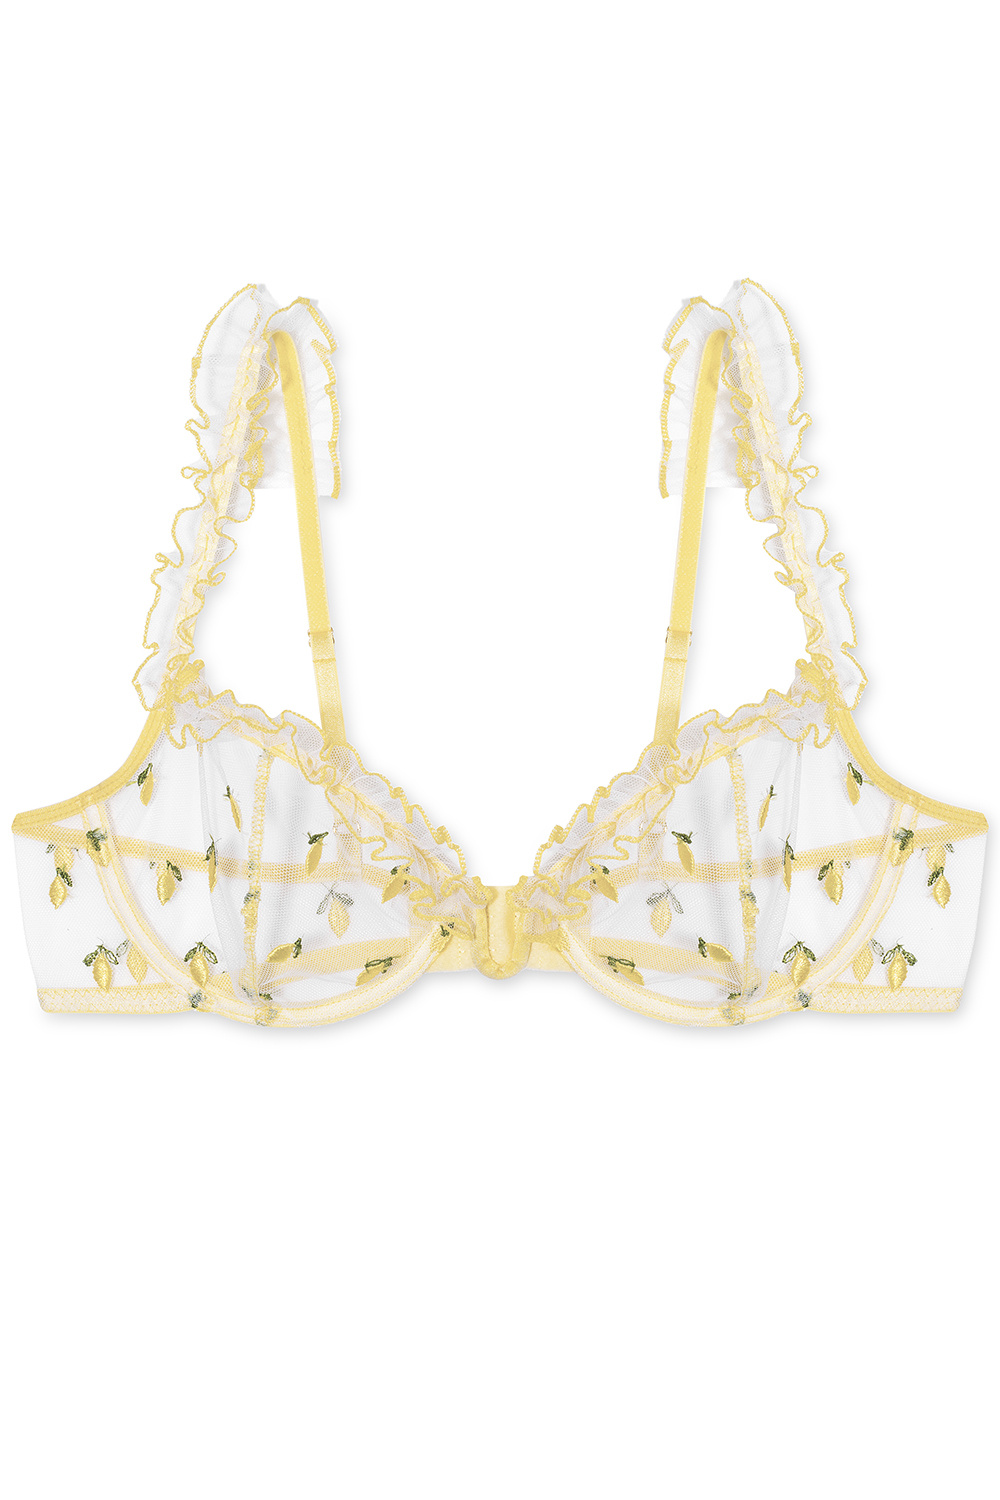 Frequently asked questions ‘Citron’ underwire bra